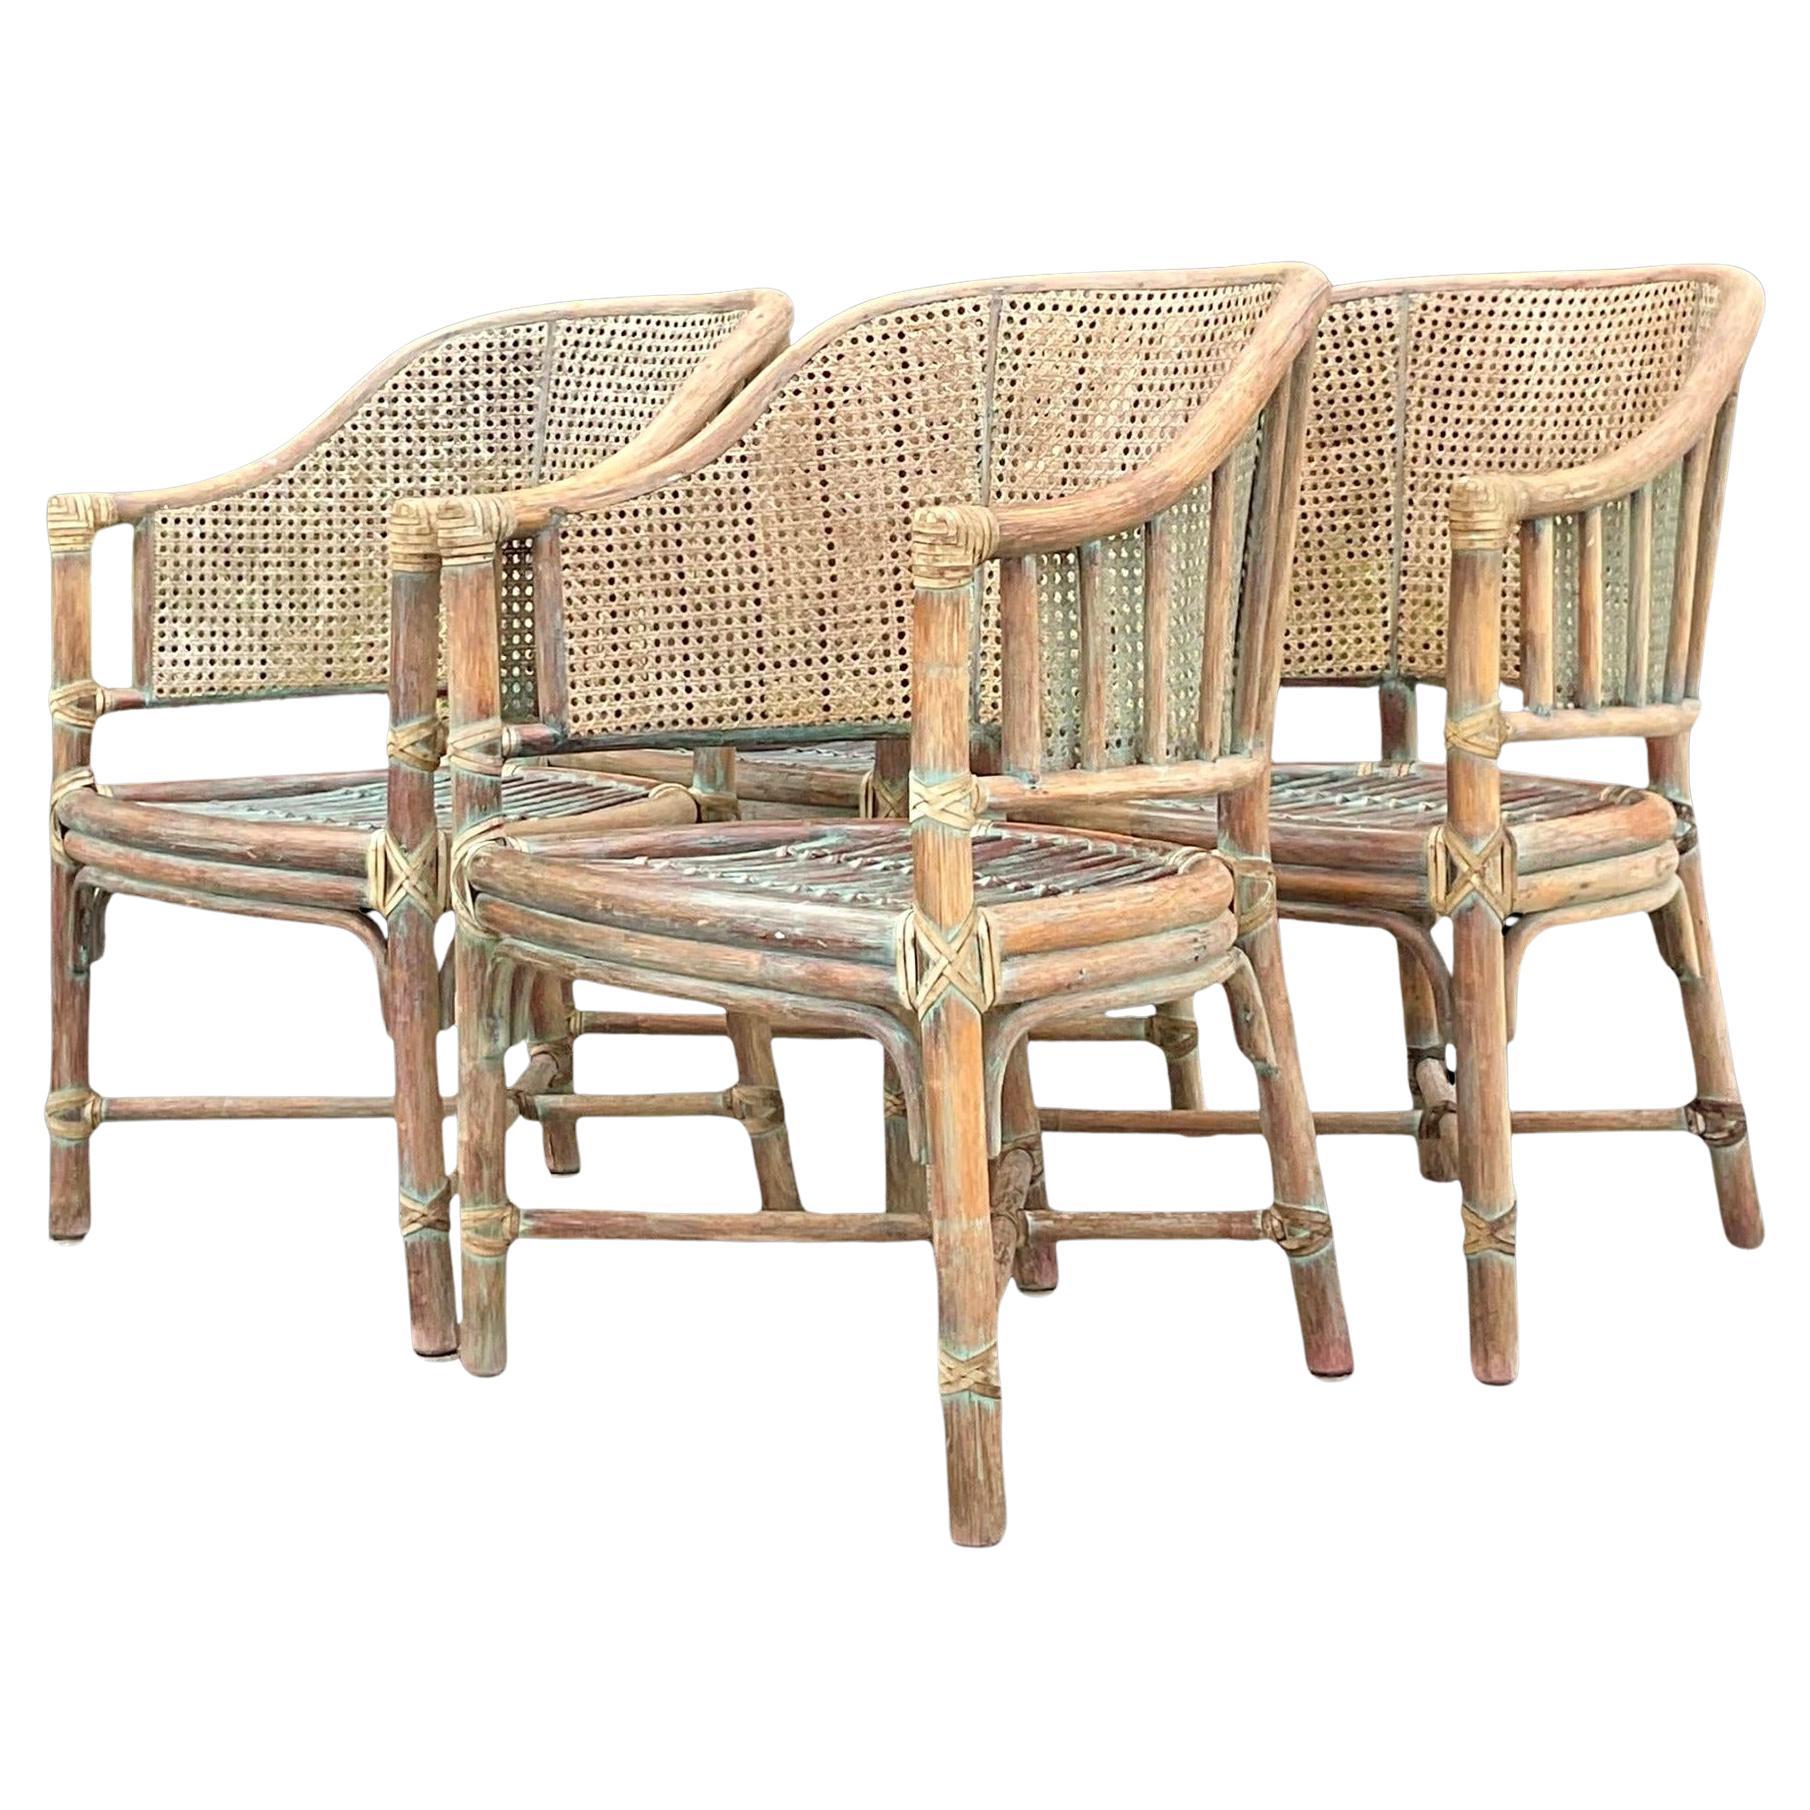 Vintage Coastal McGuire Patinated Bent Rattan Cane Dining Chairs - Set of 4